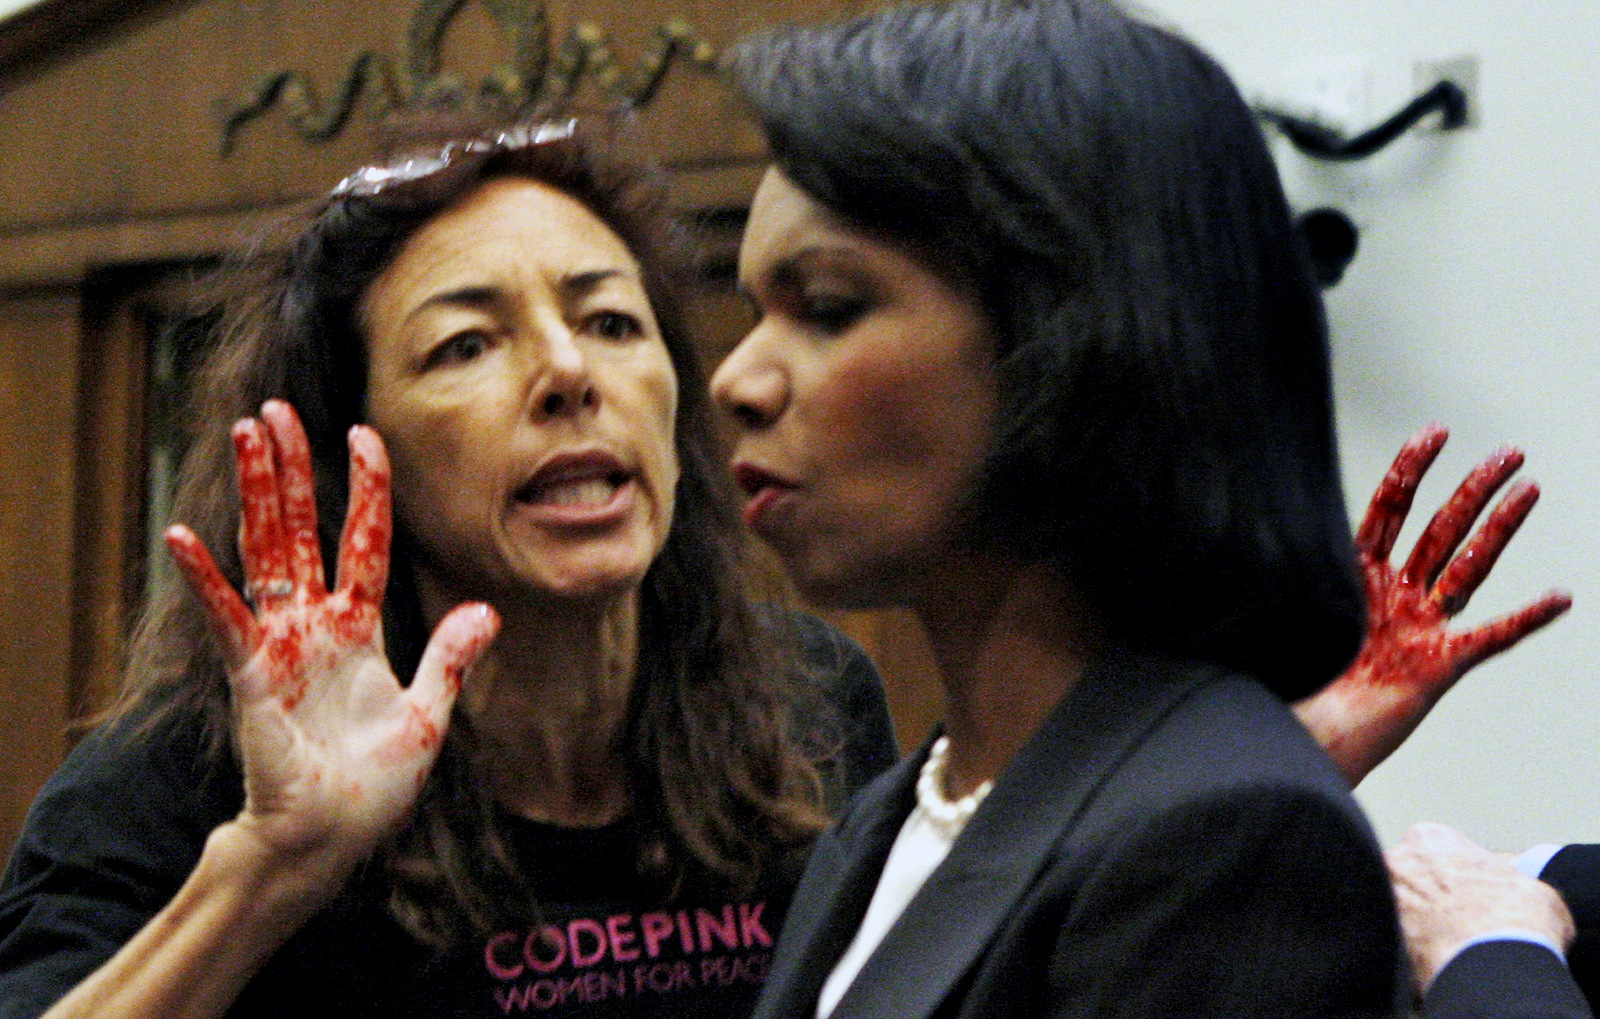 Code Pink member Desiree Anita Ali-Fairooz, pictured here confronting Secretary of State Condoleezza Rice over the Iraq war, has been convicted of being disruptive at US Attorney General Jeff Sessions' confirmation hearing. (AP/Charles Dharapak)